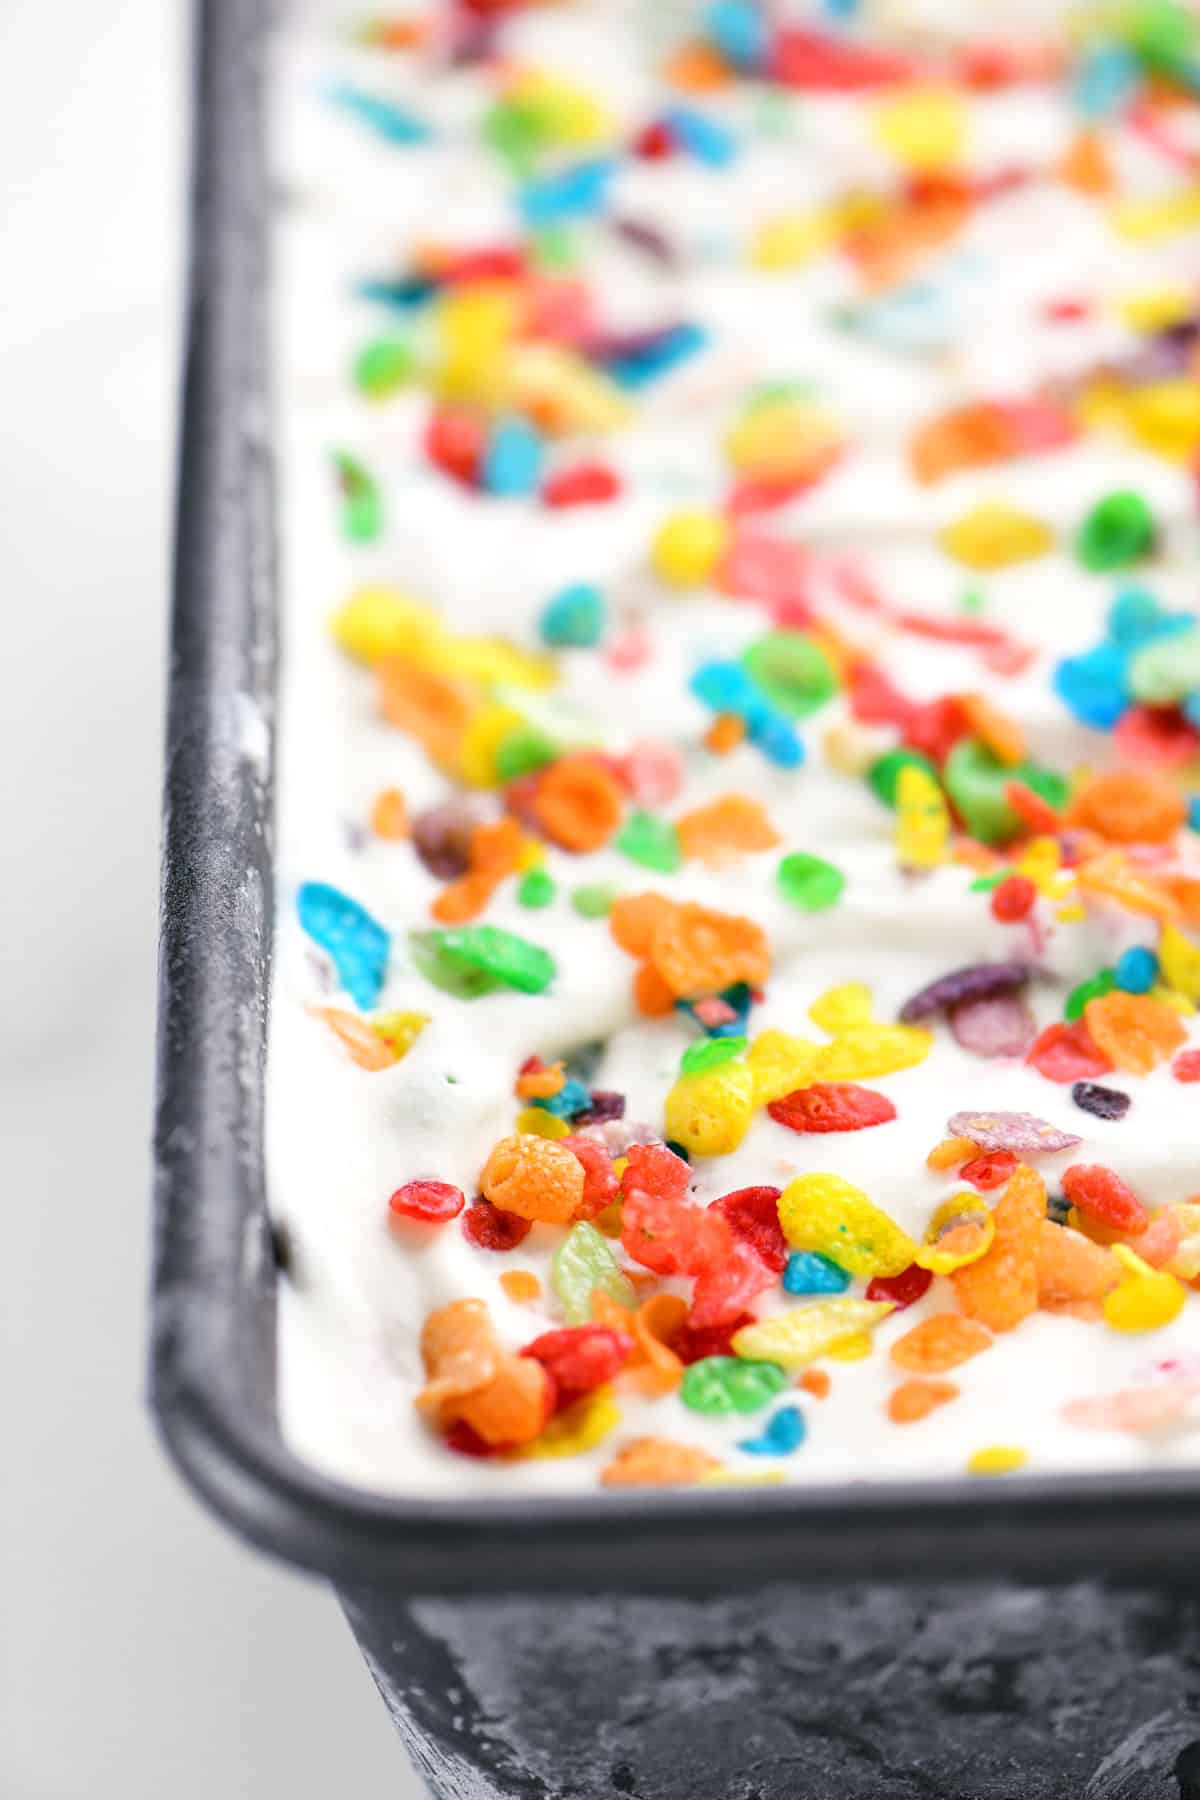 Fruity Pebbles cereal on top of ice cream.